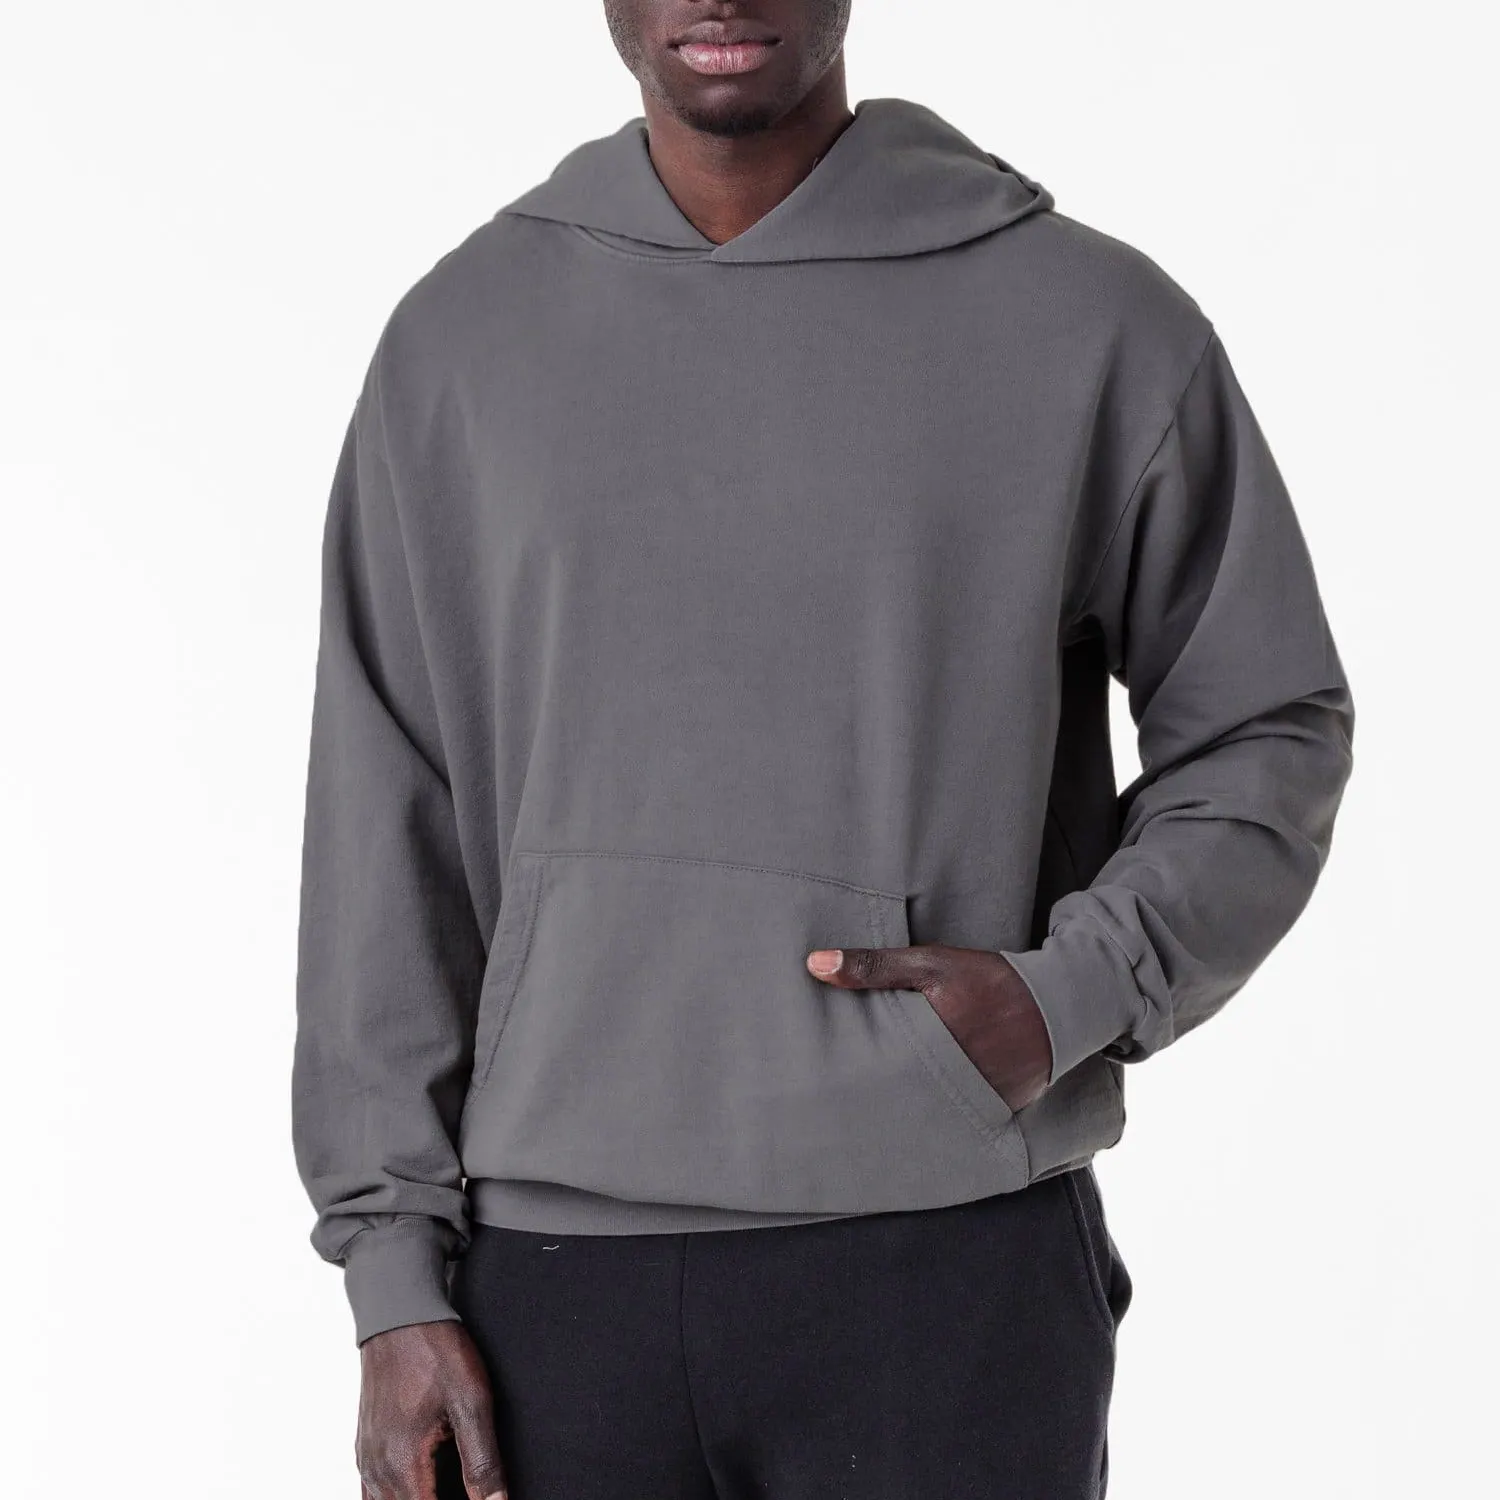 YWGH-over size men's hoodies   sweatshirts custom made high quality thick cotton hoodies men's pullover oversized hoodie